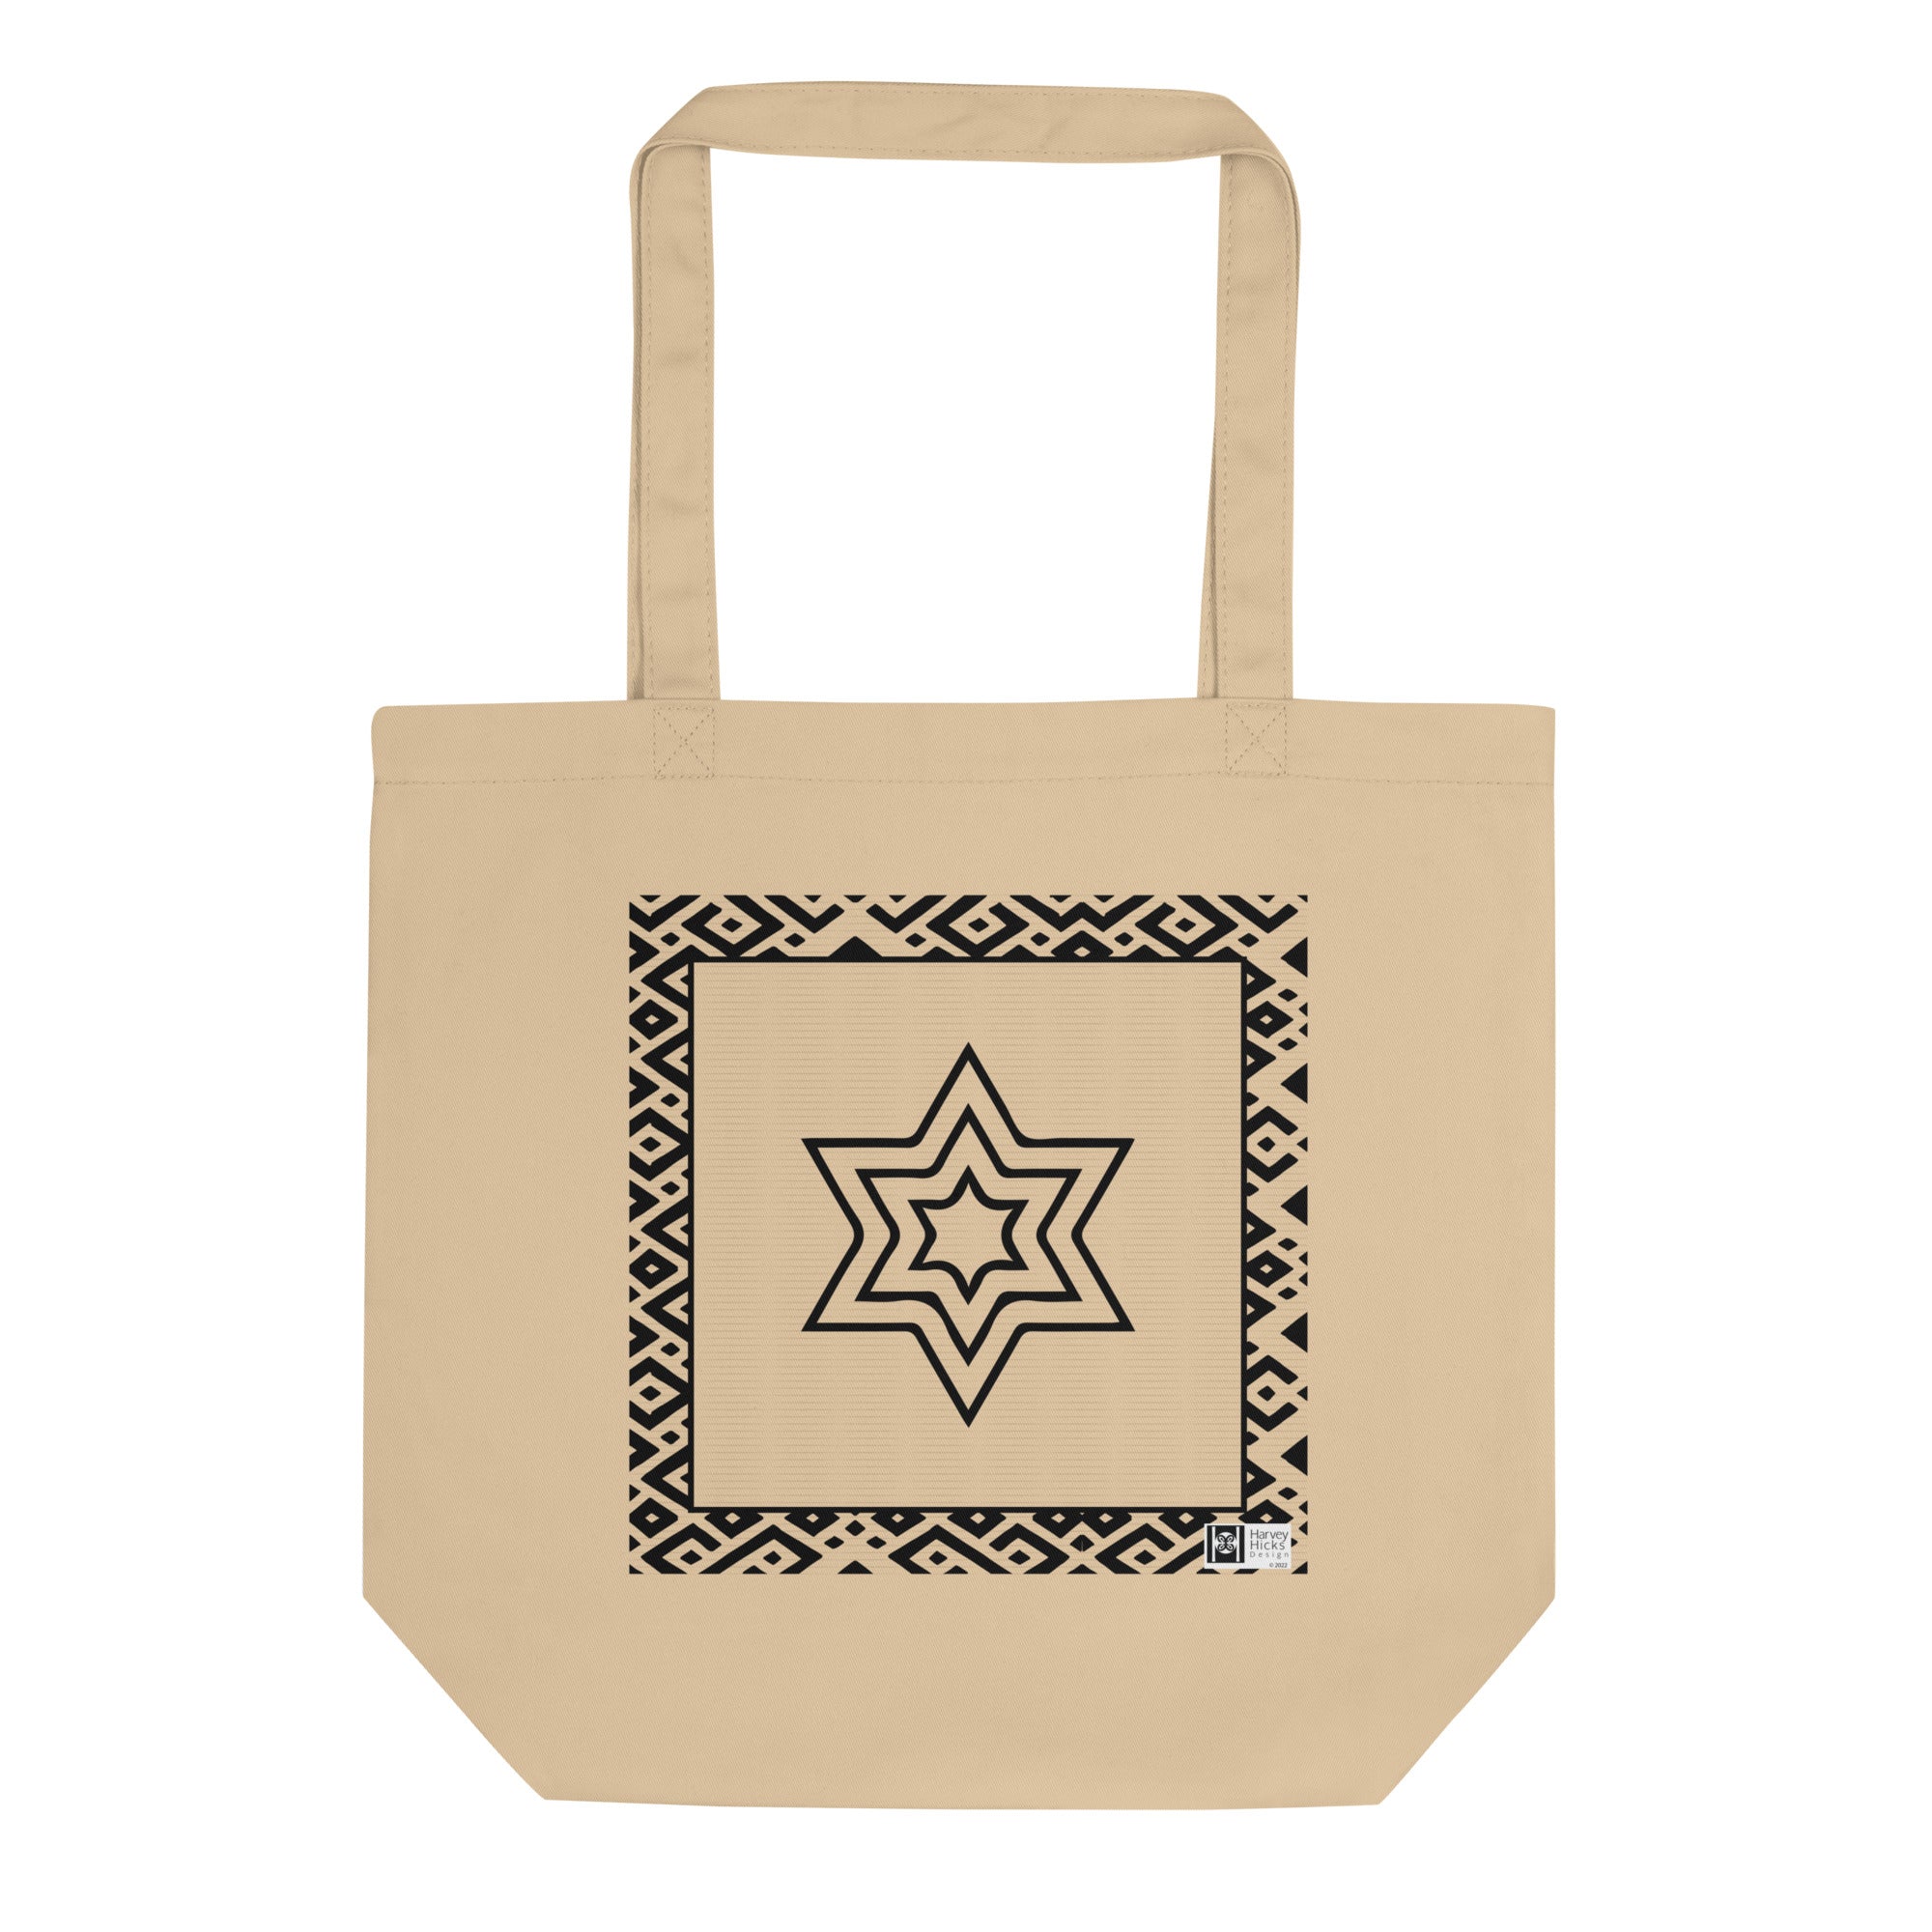 100% cotton Eco Tote Bag, featuring the Adinkra symbol for industry, NO TEXT